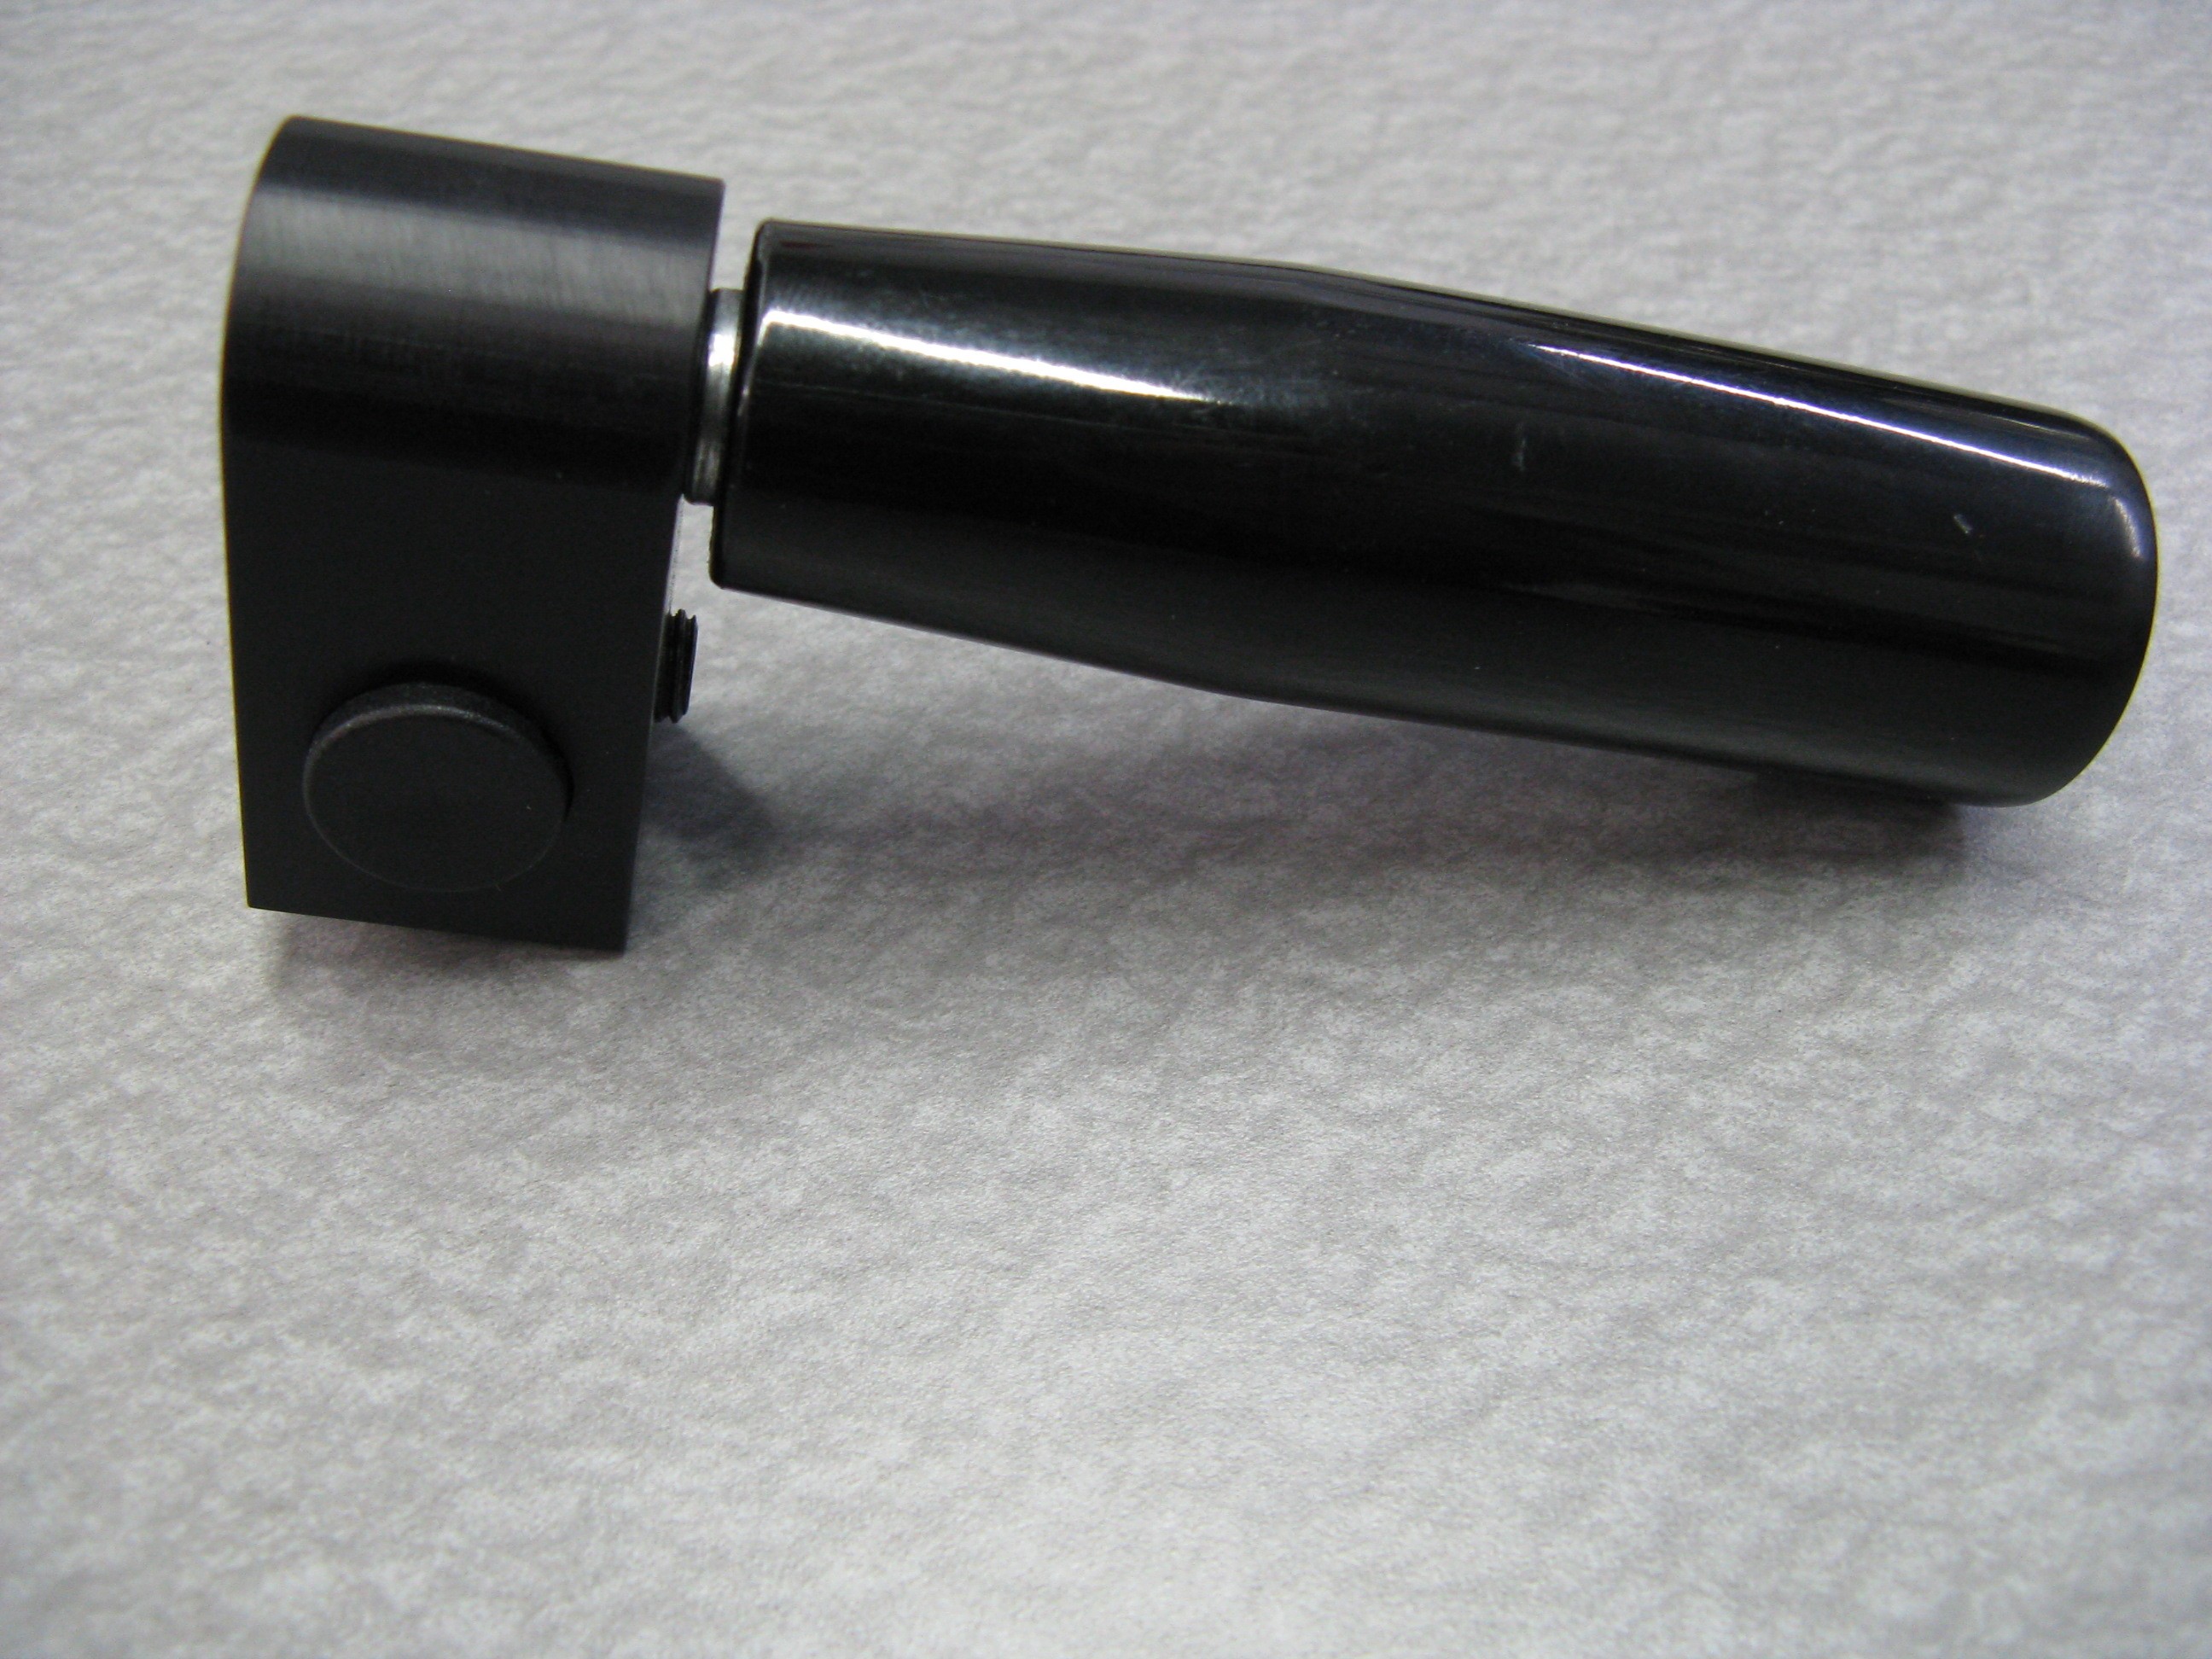 Roller Conversion Handle For Dillon Square Deal B